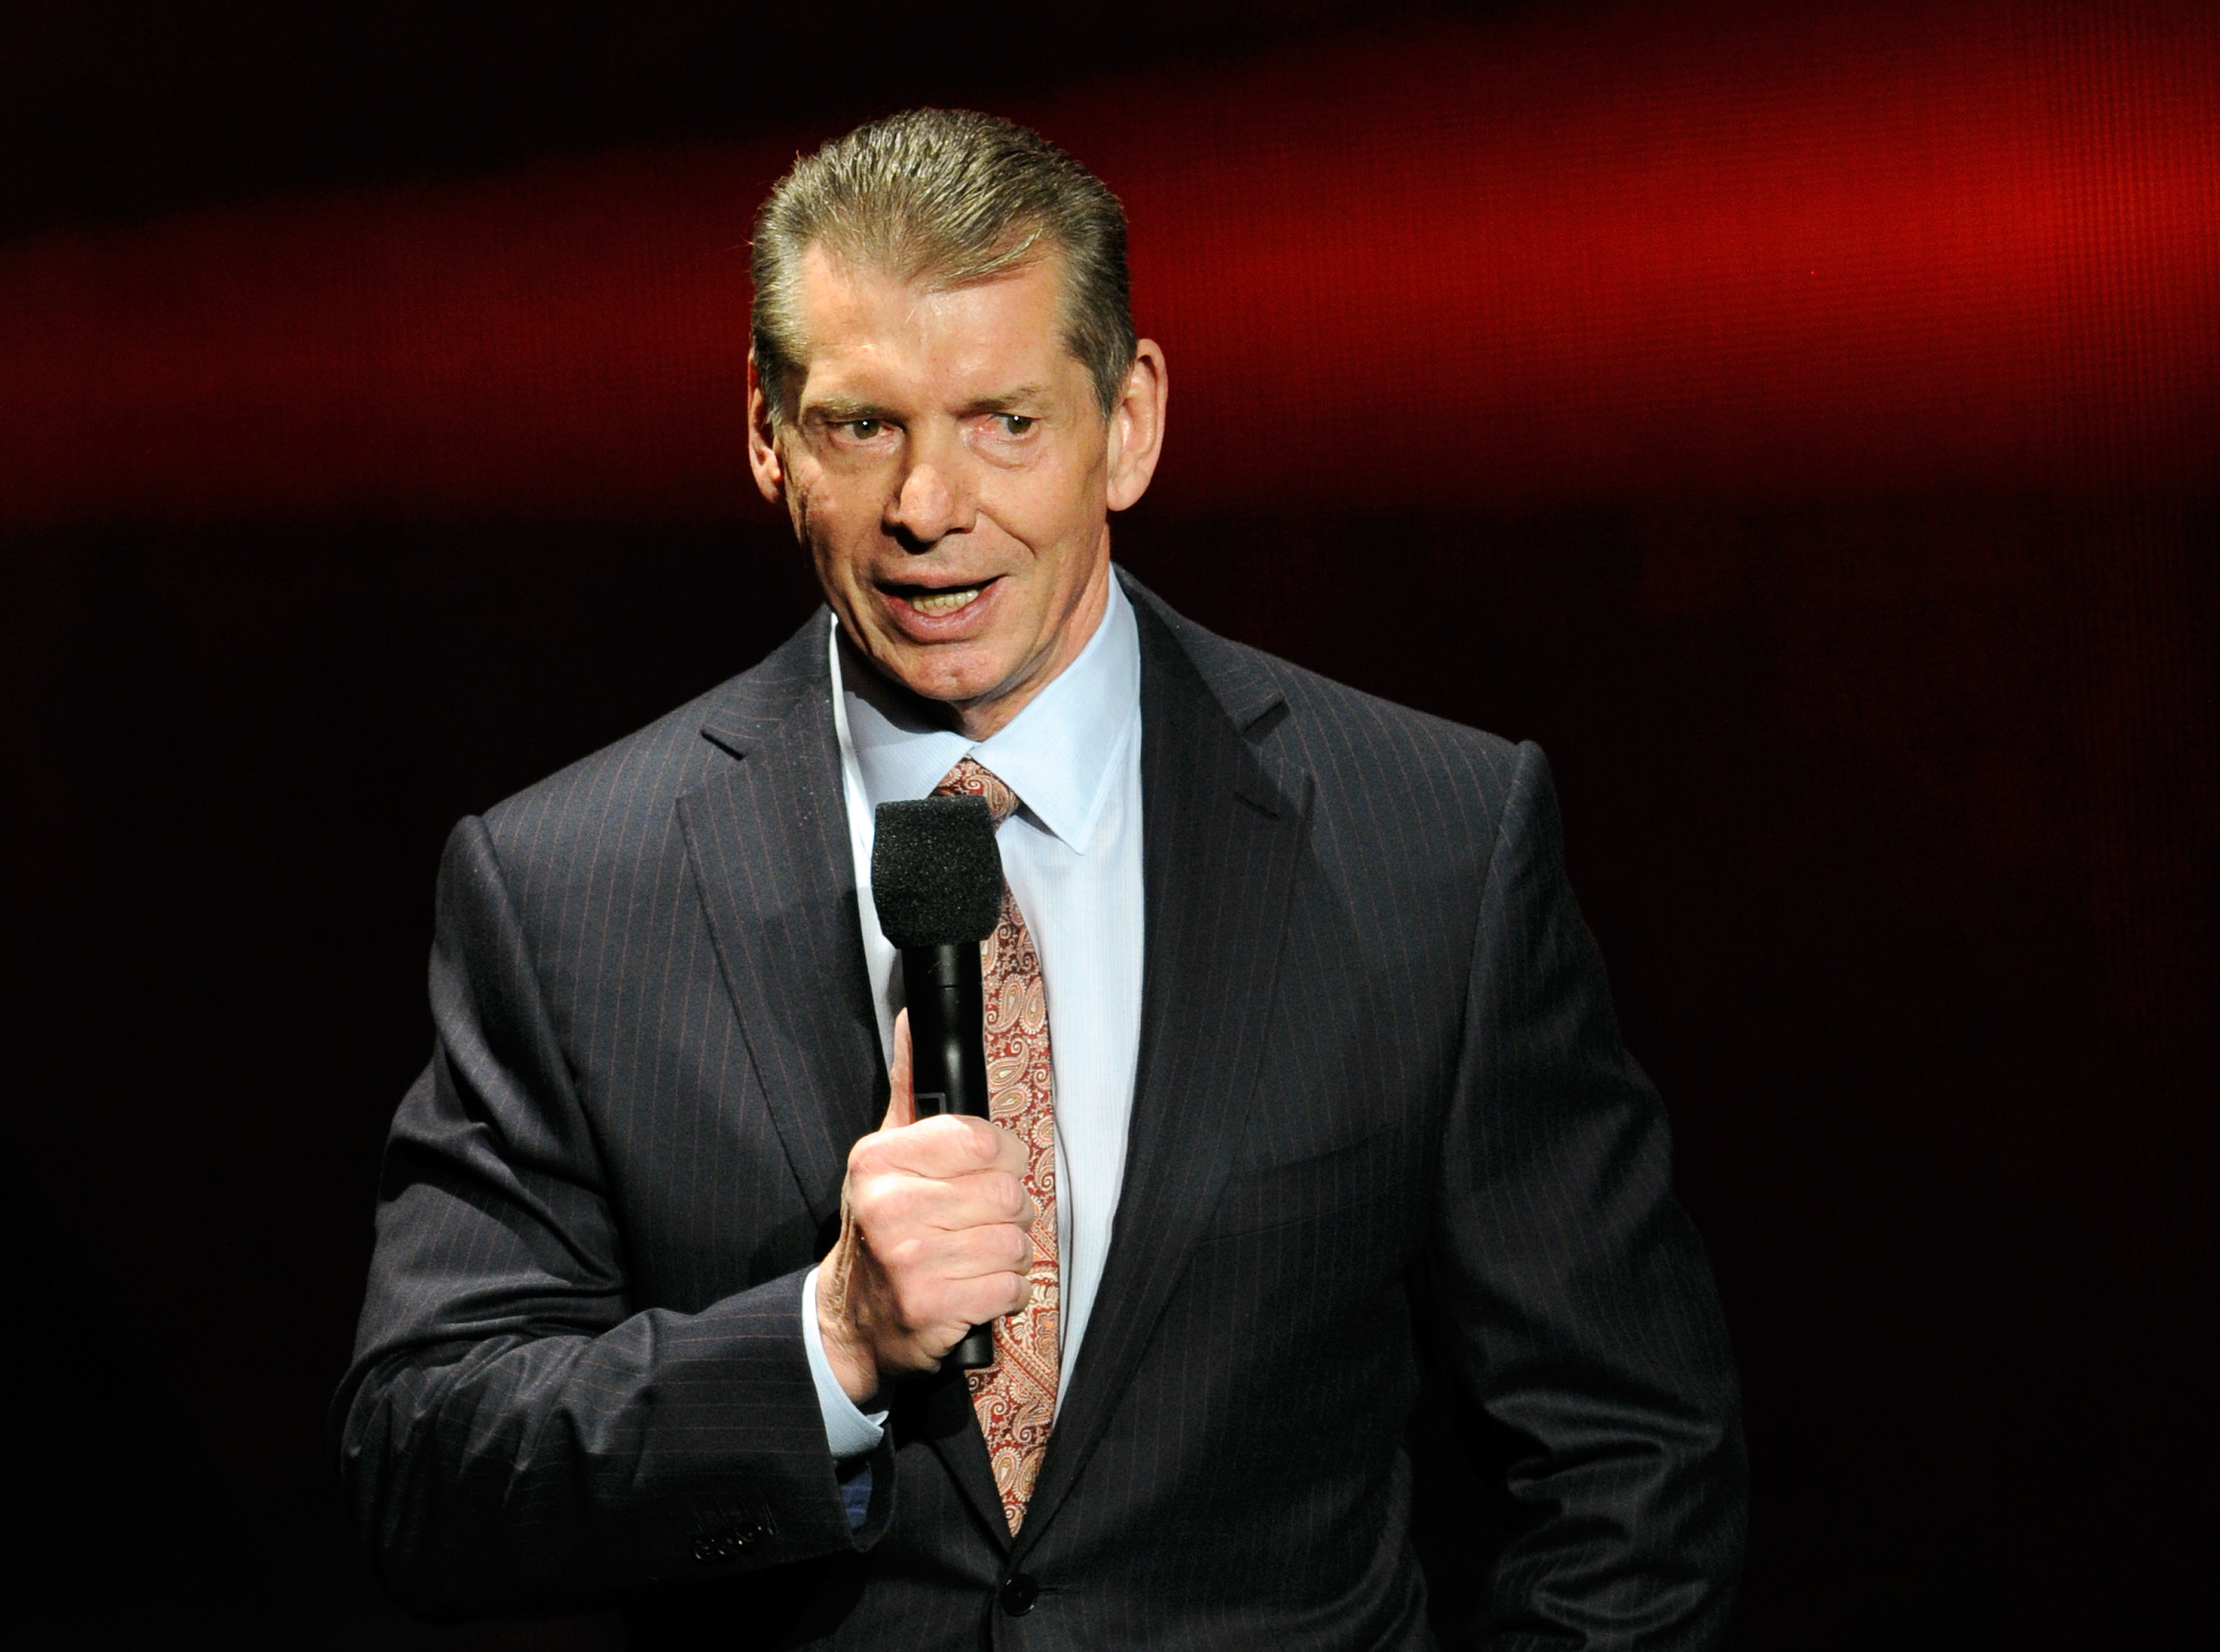 Vince McMahon Net Worth 5 Fast Facts You Need to Know